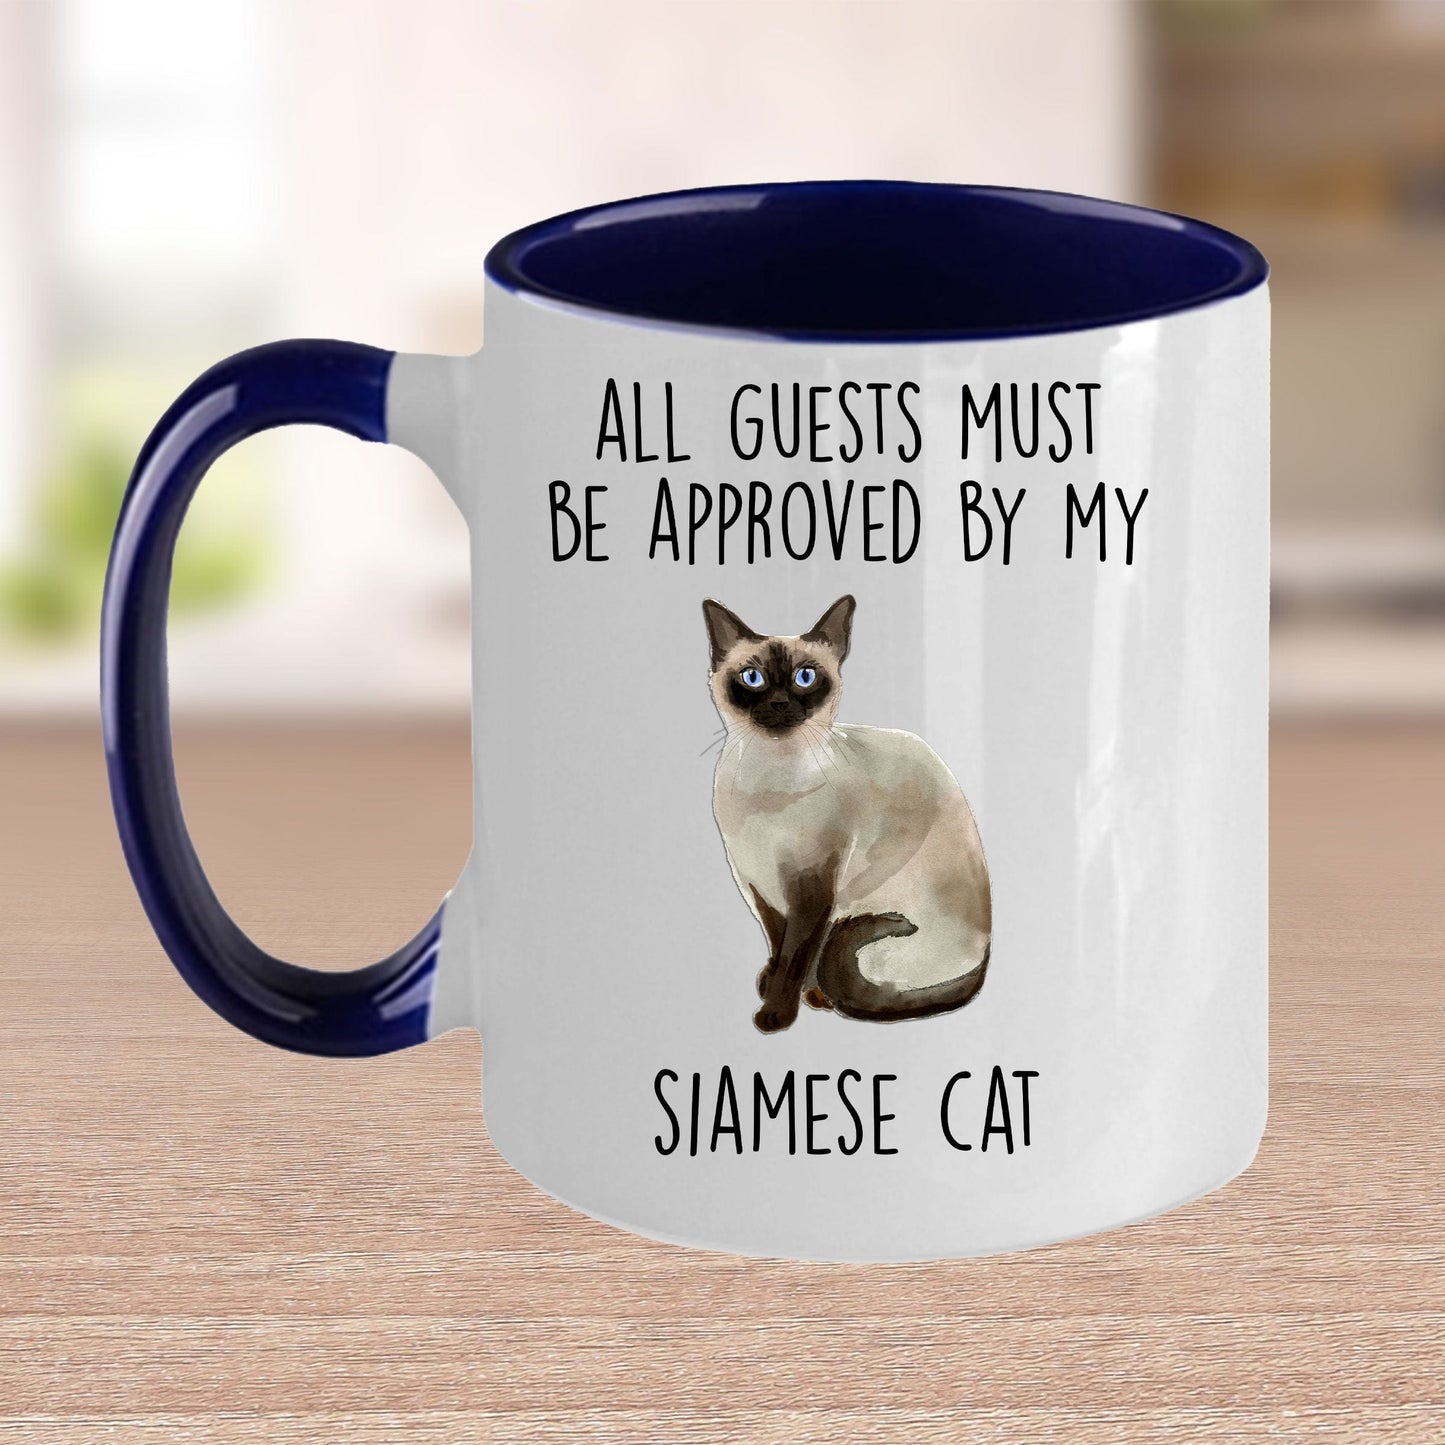 Siamese Cat Funny Ceramic Coffee Mug - All Guests Must Be Approved